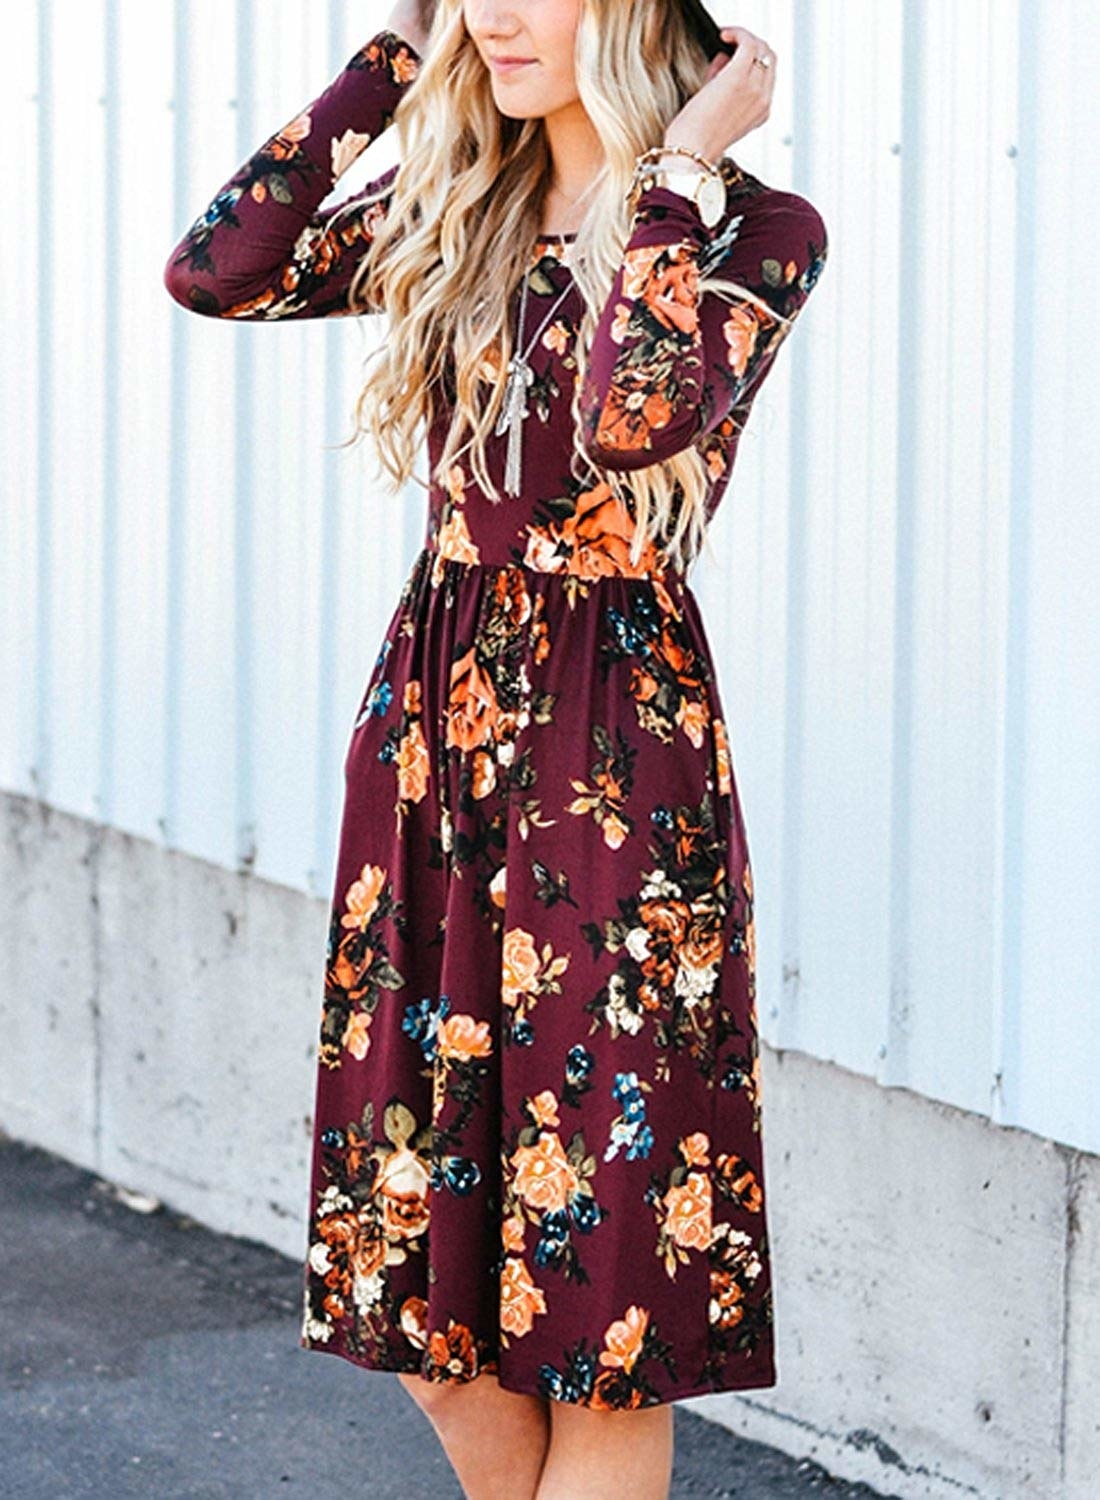 33 Gorgeous Long-Sleeved Dresses To ...